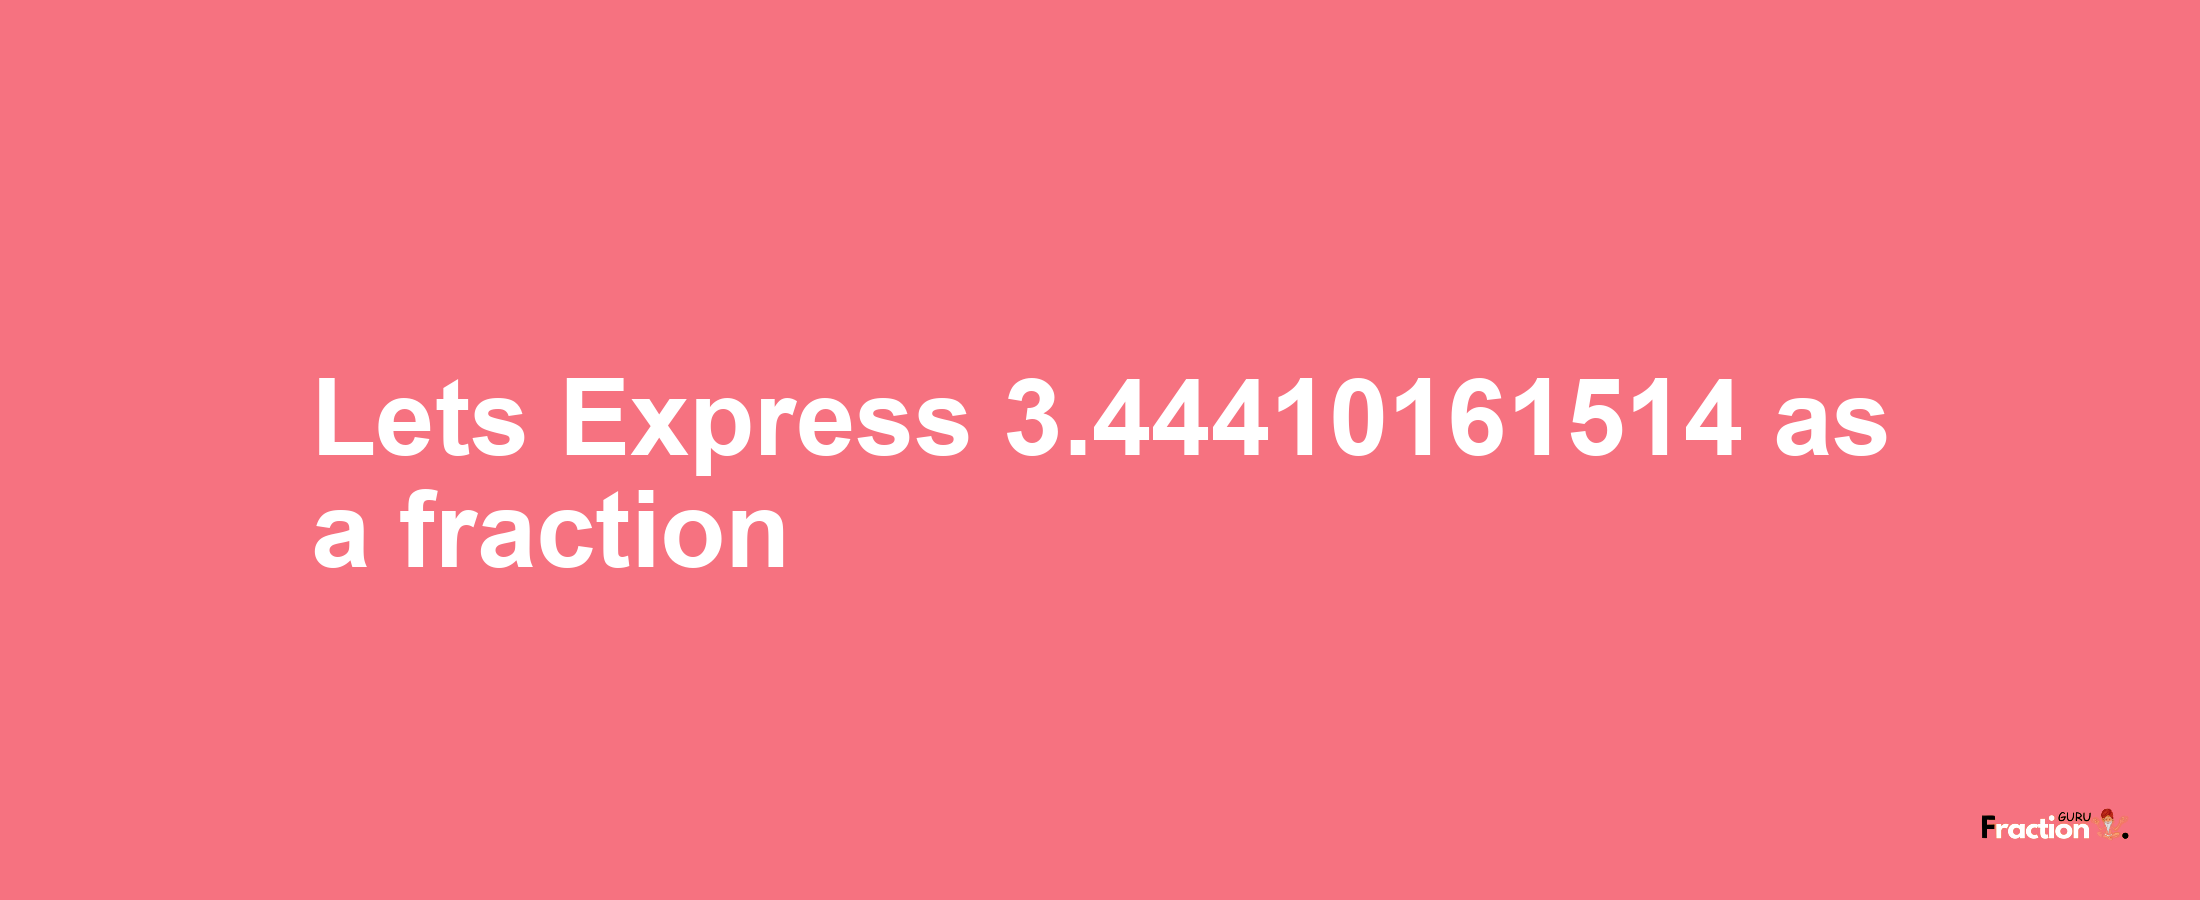 Lets Express 3.44410161514 as afraction